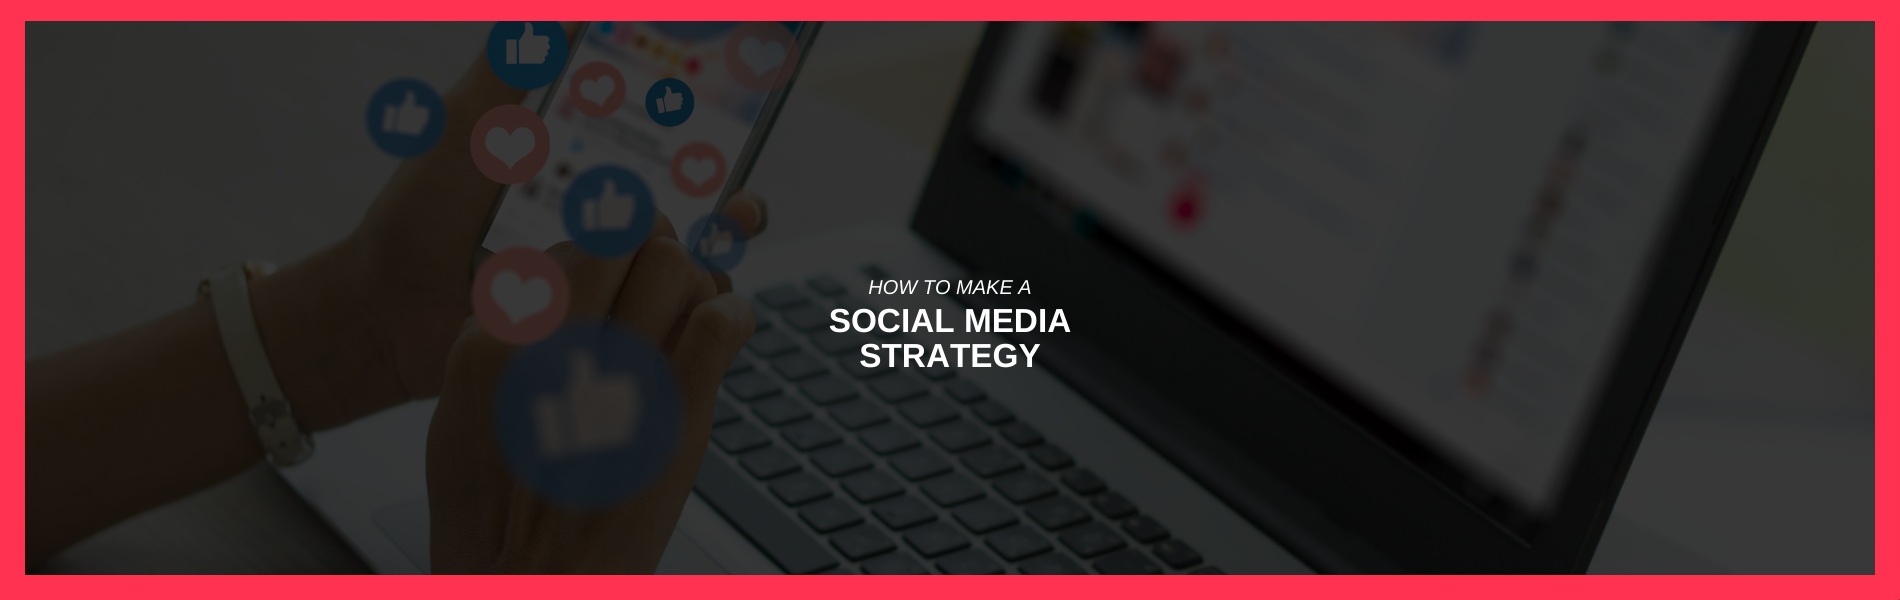 How to Make a Social Media Strategy